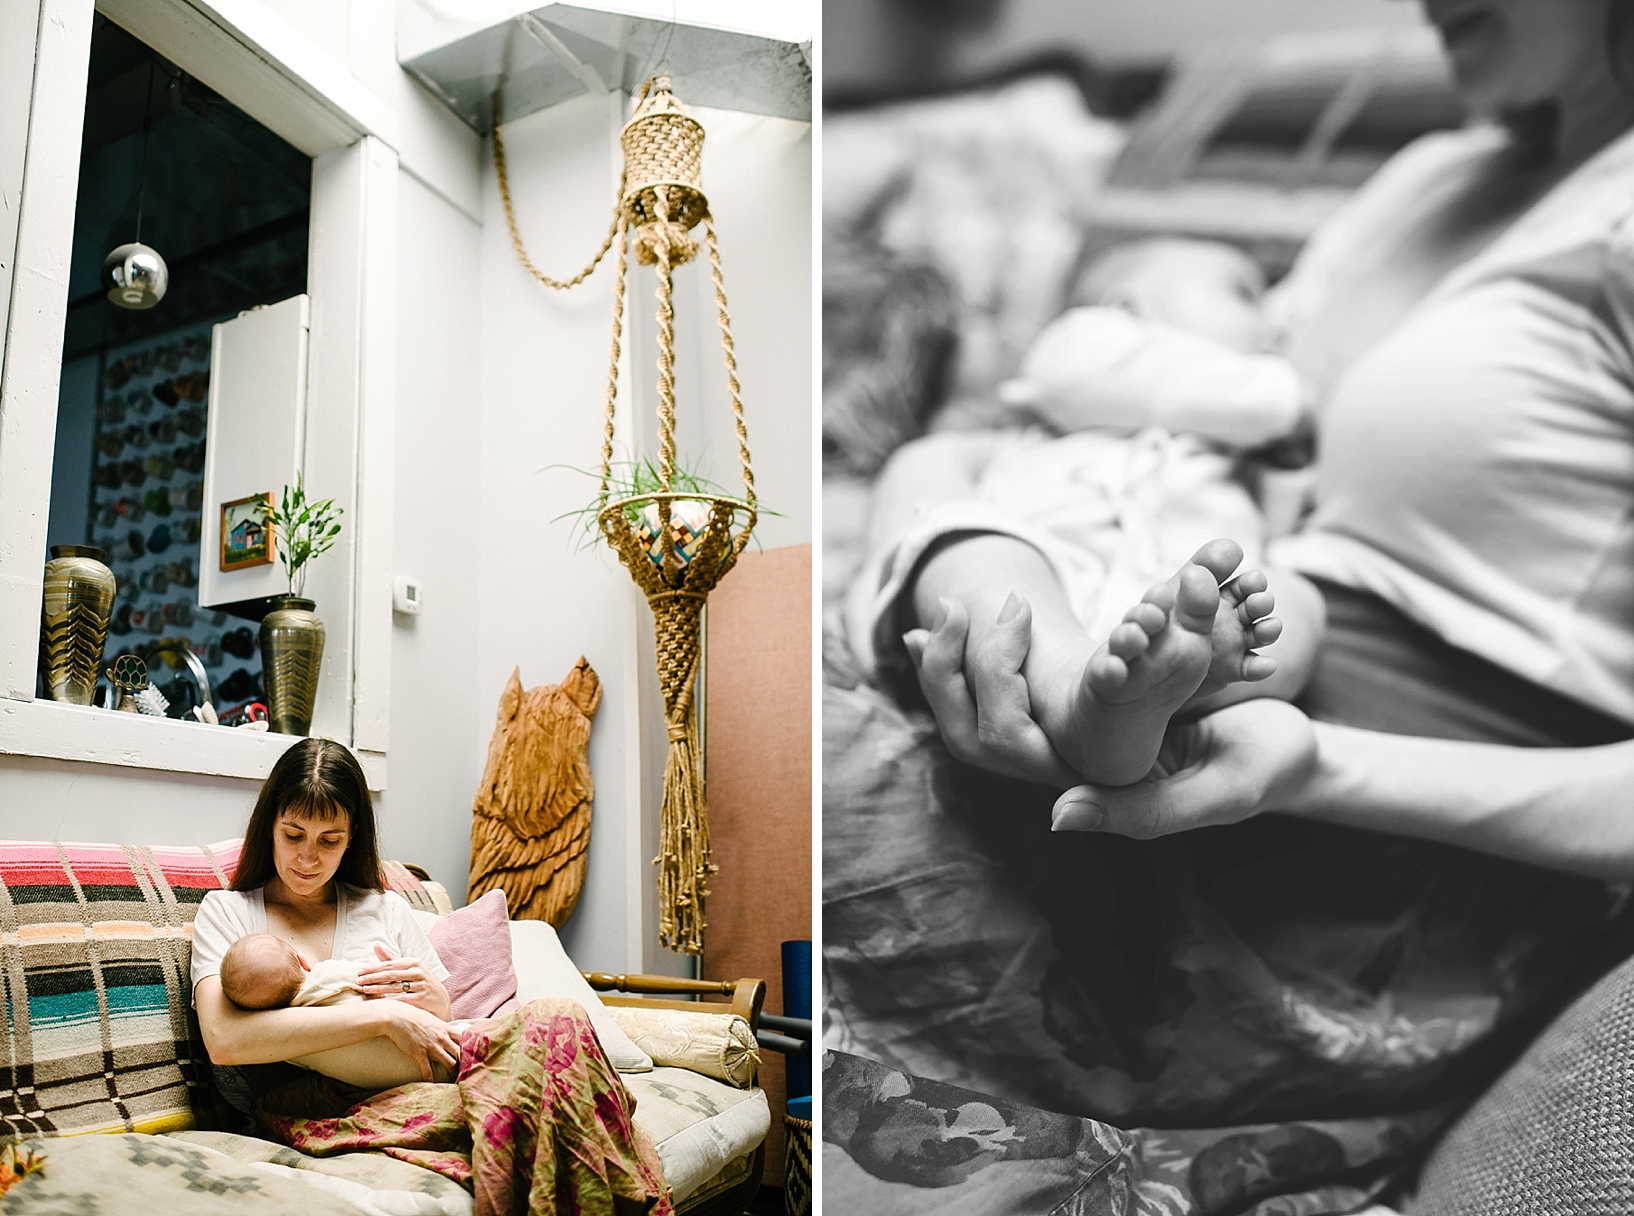 woman nursing baby sitting on couch next to macrame plant hanger